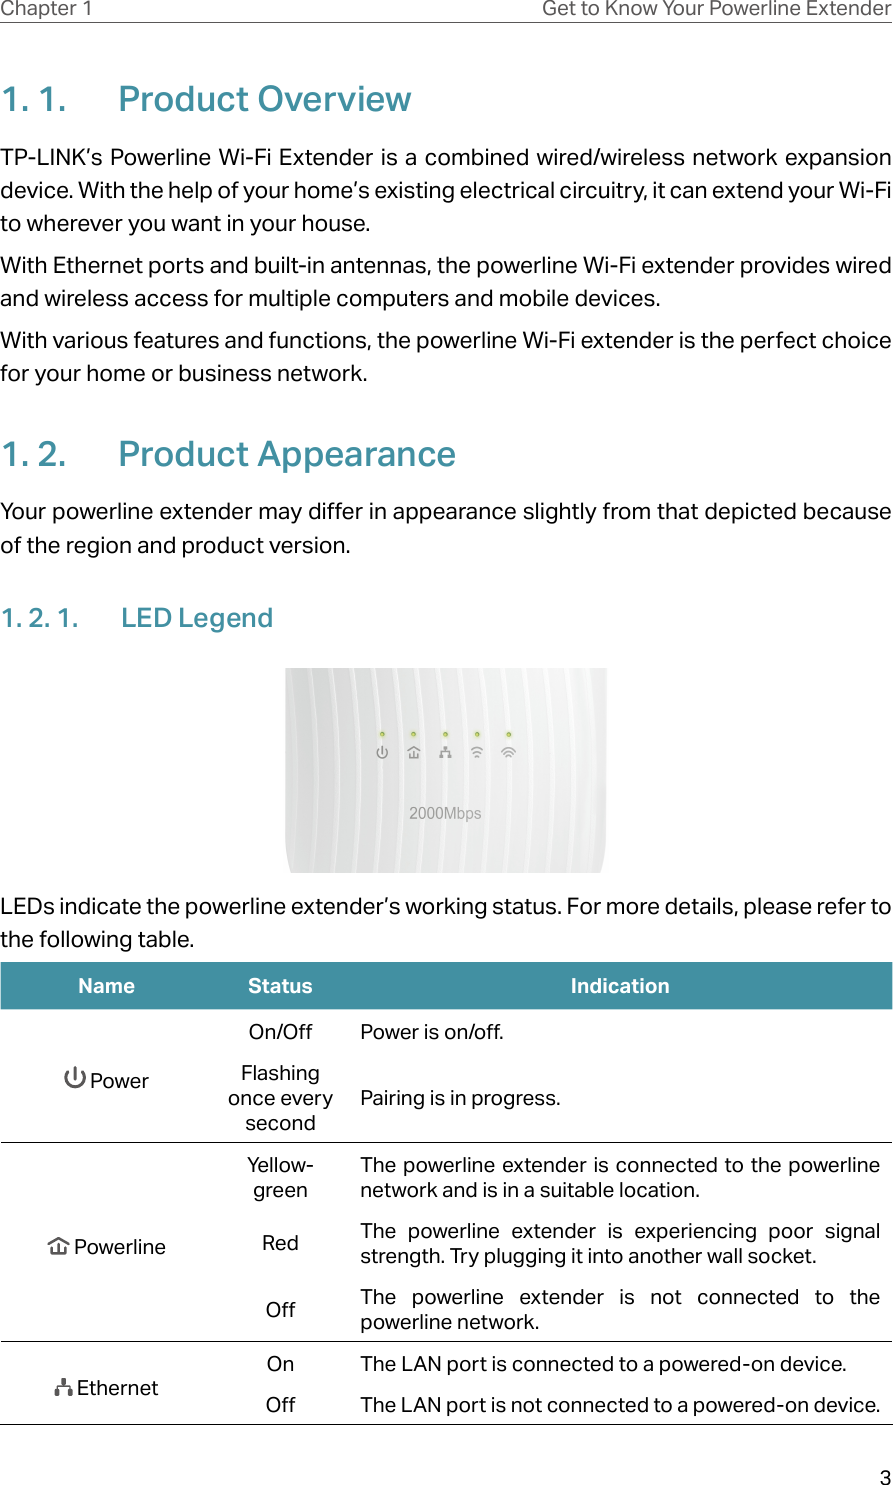 3Chapter 1 Get to Know Your Powerline Extender1. 1.  Product OverviewTP-LINK’s Powerline Wi-Fi Extender is a combined wired/wireless network expansion device. With the help of your home’s existing electrical circuitry, it can extend your Wi-Fi to wherever you want in your house. With Ethernet ports and built-in antennas, the powerline Wi-Fi extender provides wired and wireless access for multiple computers and mobile devices.With various features and functions, the powerline Wi-Fi extender is the perfect choice for your home or business network.1. 2.  Product AppearanceYour powerline extender may differ in appearance slightly from that depicted because of the region and product version.1. 2. 1.  LED LegendLEDs indicate the powerline extender’s working status. For more details, please refer to the following table.Name Status Indication PowerOn/Off Power is on/off.Flashing once every secondPairing is in progress. PowerlineYellow-greenThe powerline extender is connected to the powerline network and is in a suitable location.Red The powerline extender is experiencing poor signal strength. Try plugging it into another wall socket.Off The powerline extender is not connected to the powerline network. EthernetOn The LAN port is connected to a powered-on device.Off The LAN port is not connected to a powered-on device.